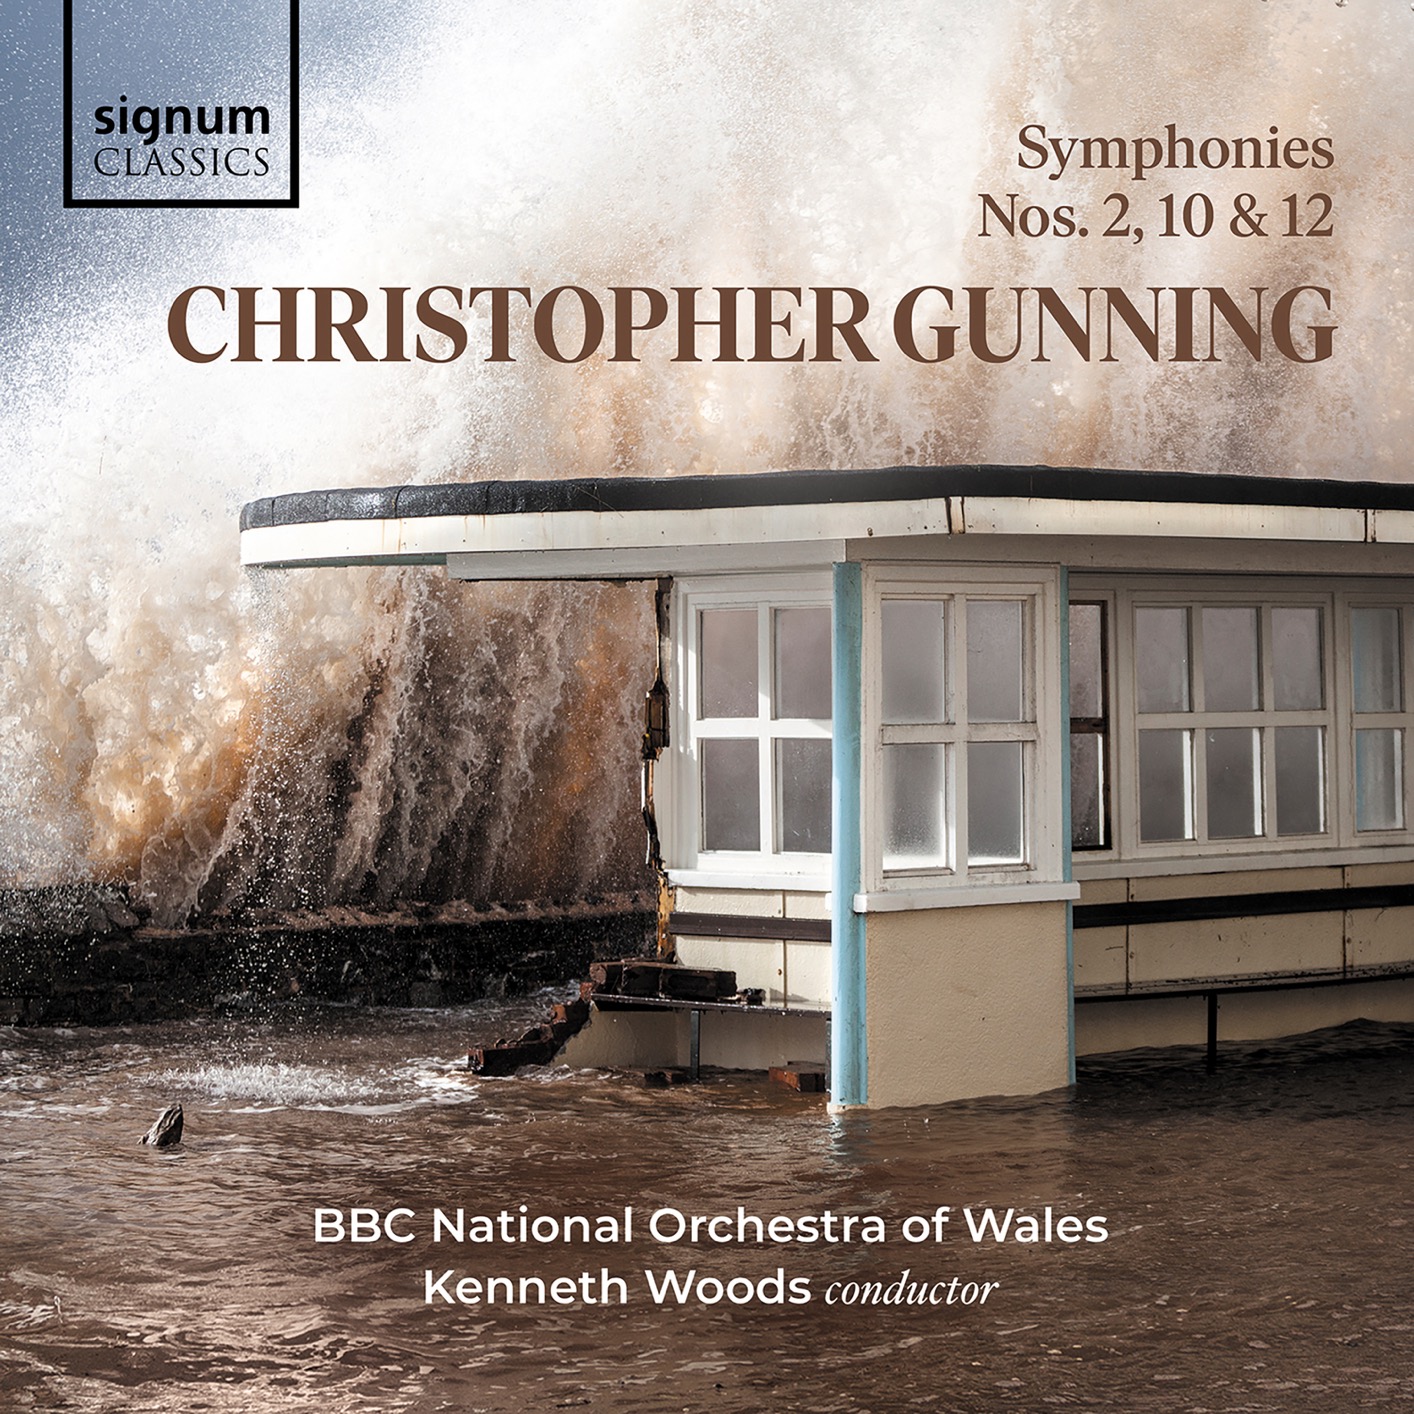 BBC National Orchestra of Wales & Kenneth Woods – Christopher Gunning: Symphonies 10, 2 and 12 (2019) [FLAC 24bit/96kHz]